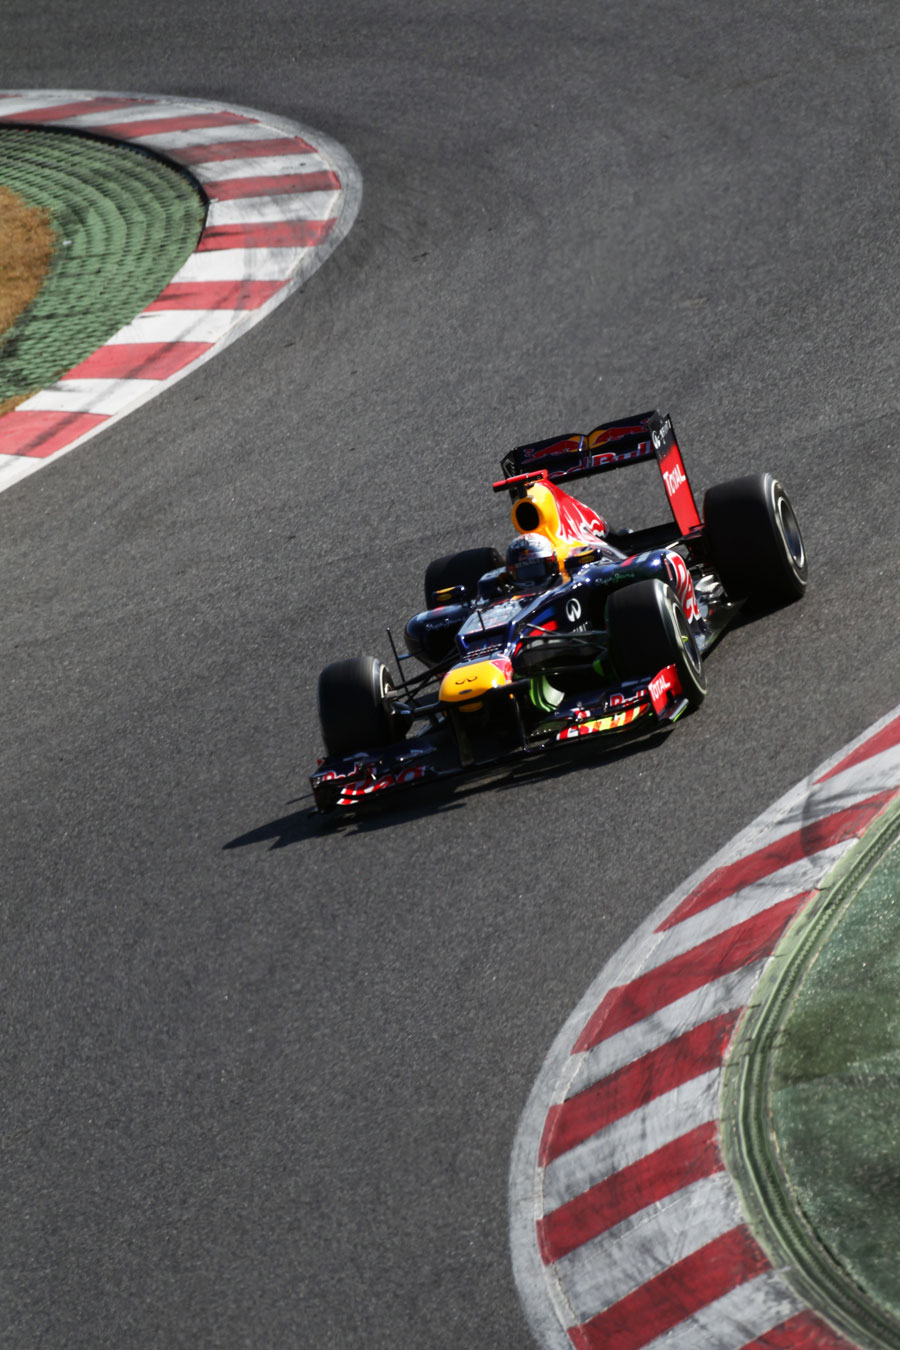 Sebastian Vettel tackles the high-speed turns one and two